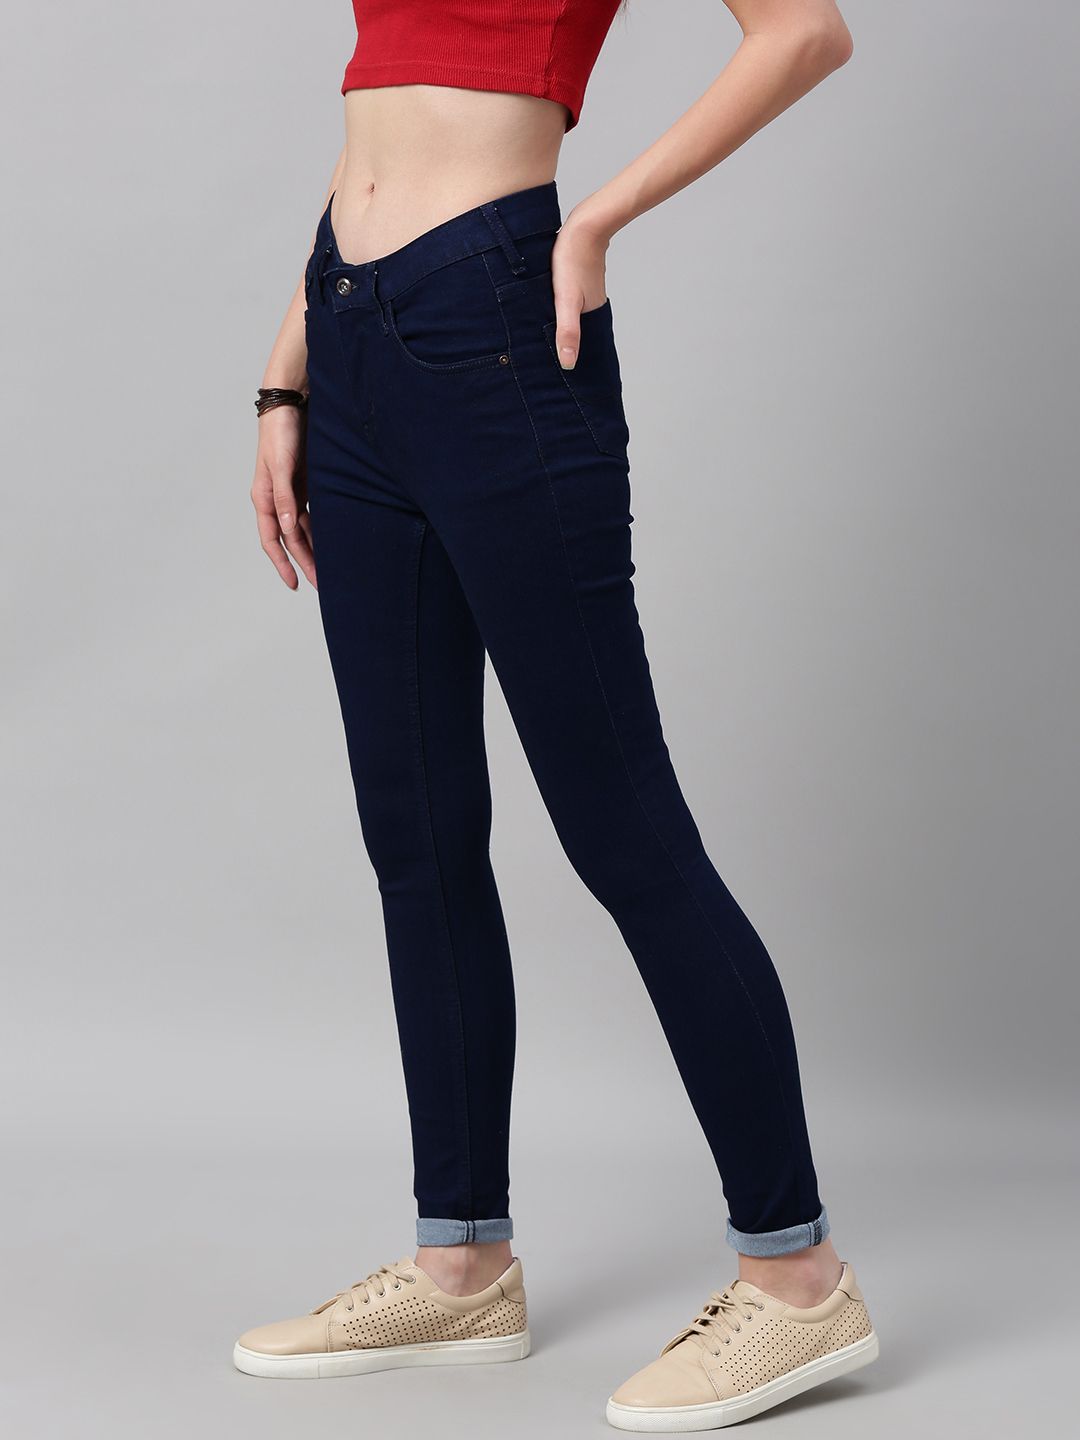 The Roadster Lifestyle Co Women Blue Super Skinny Fit Mid-Rise Clean Look Stretchable Jeans Price in India